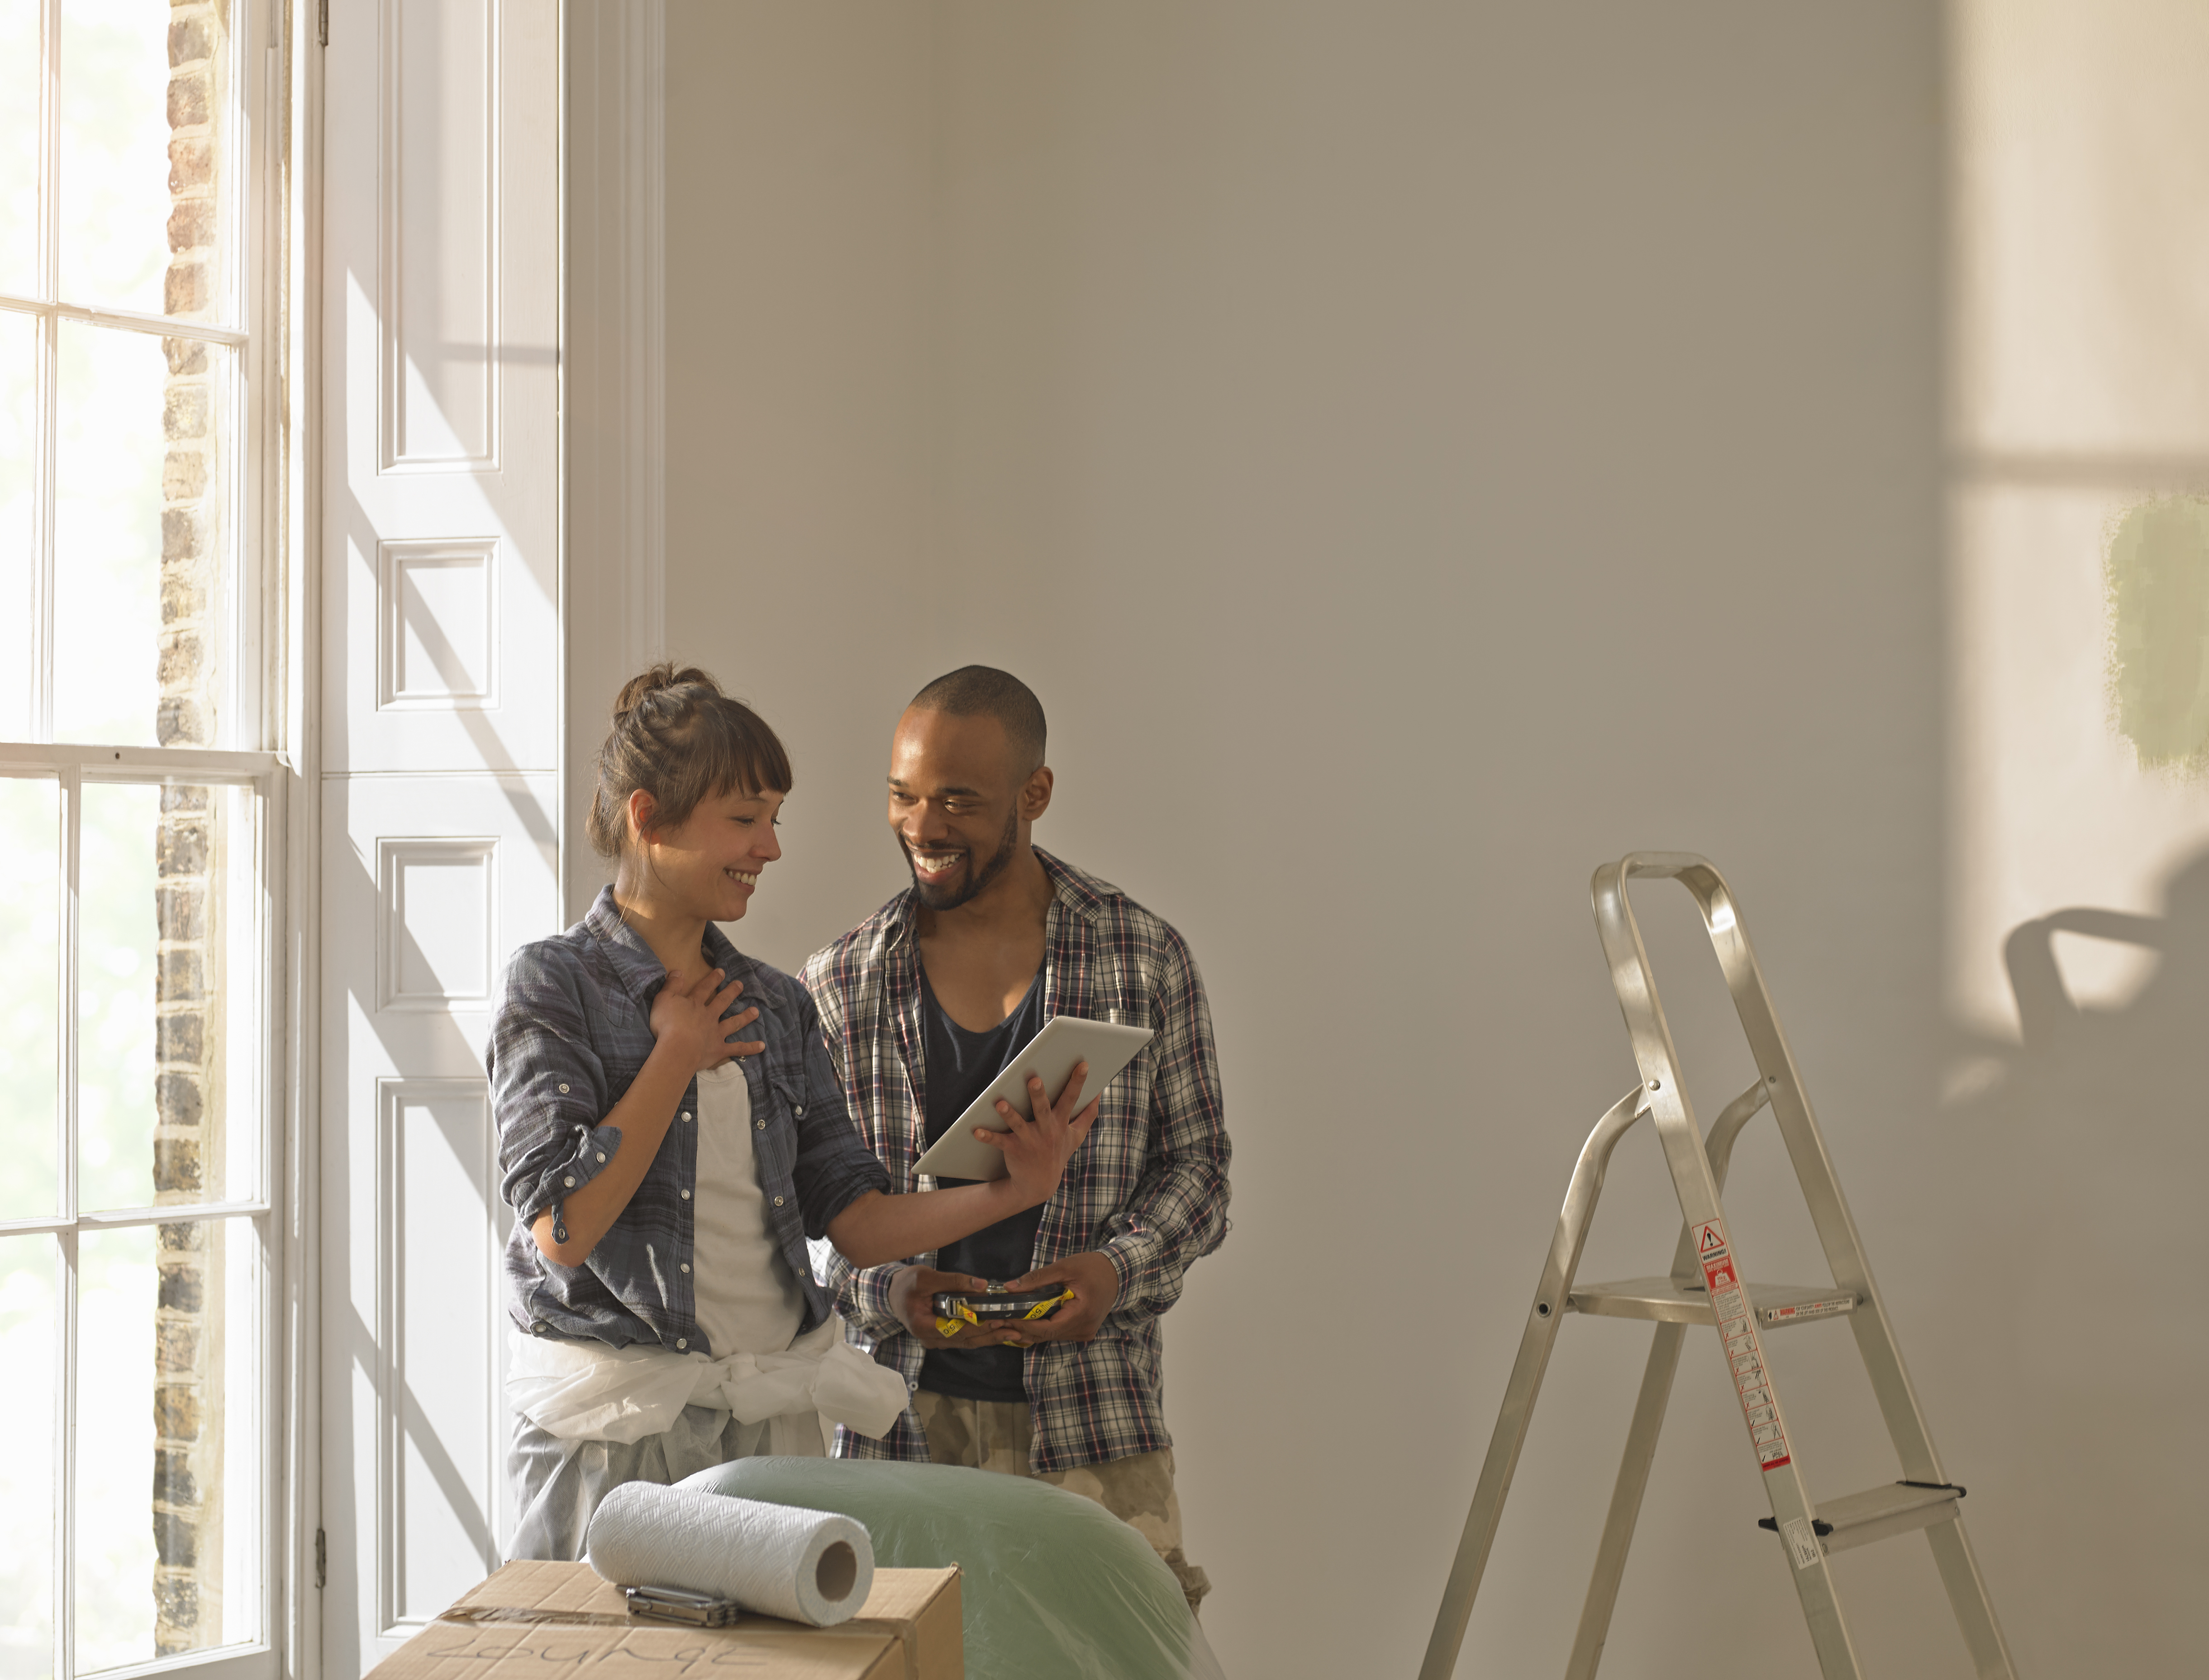 5 Cheap (And Easy) Home Improvement Projects That Will Help Your Home Sell for More